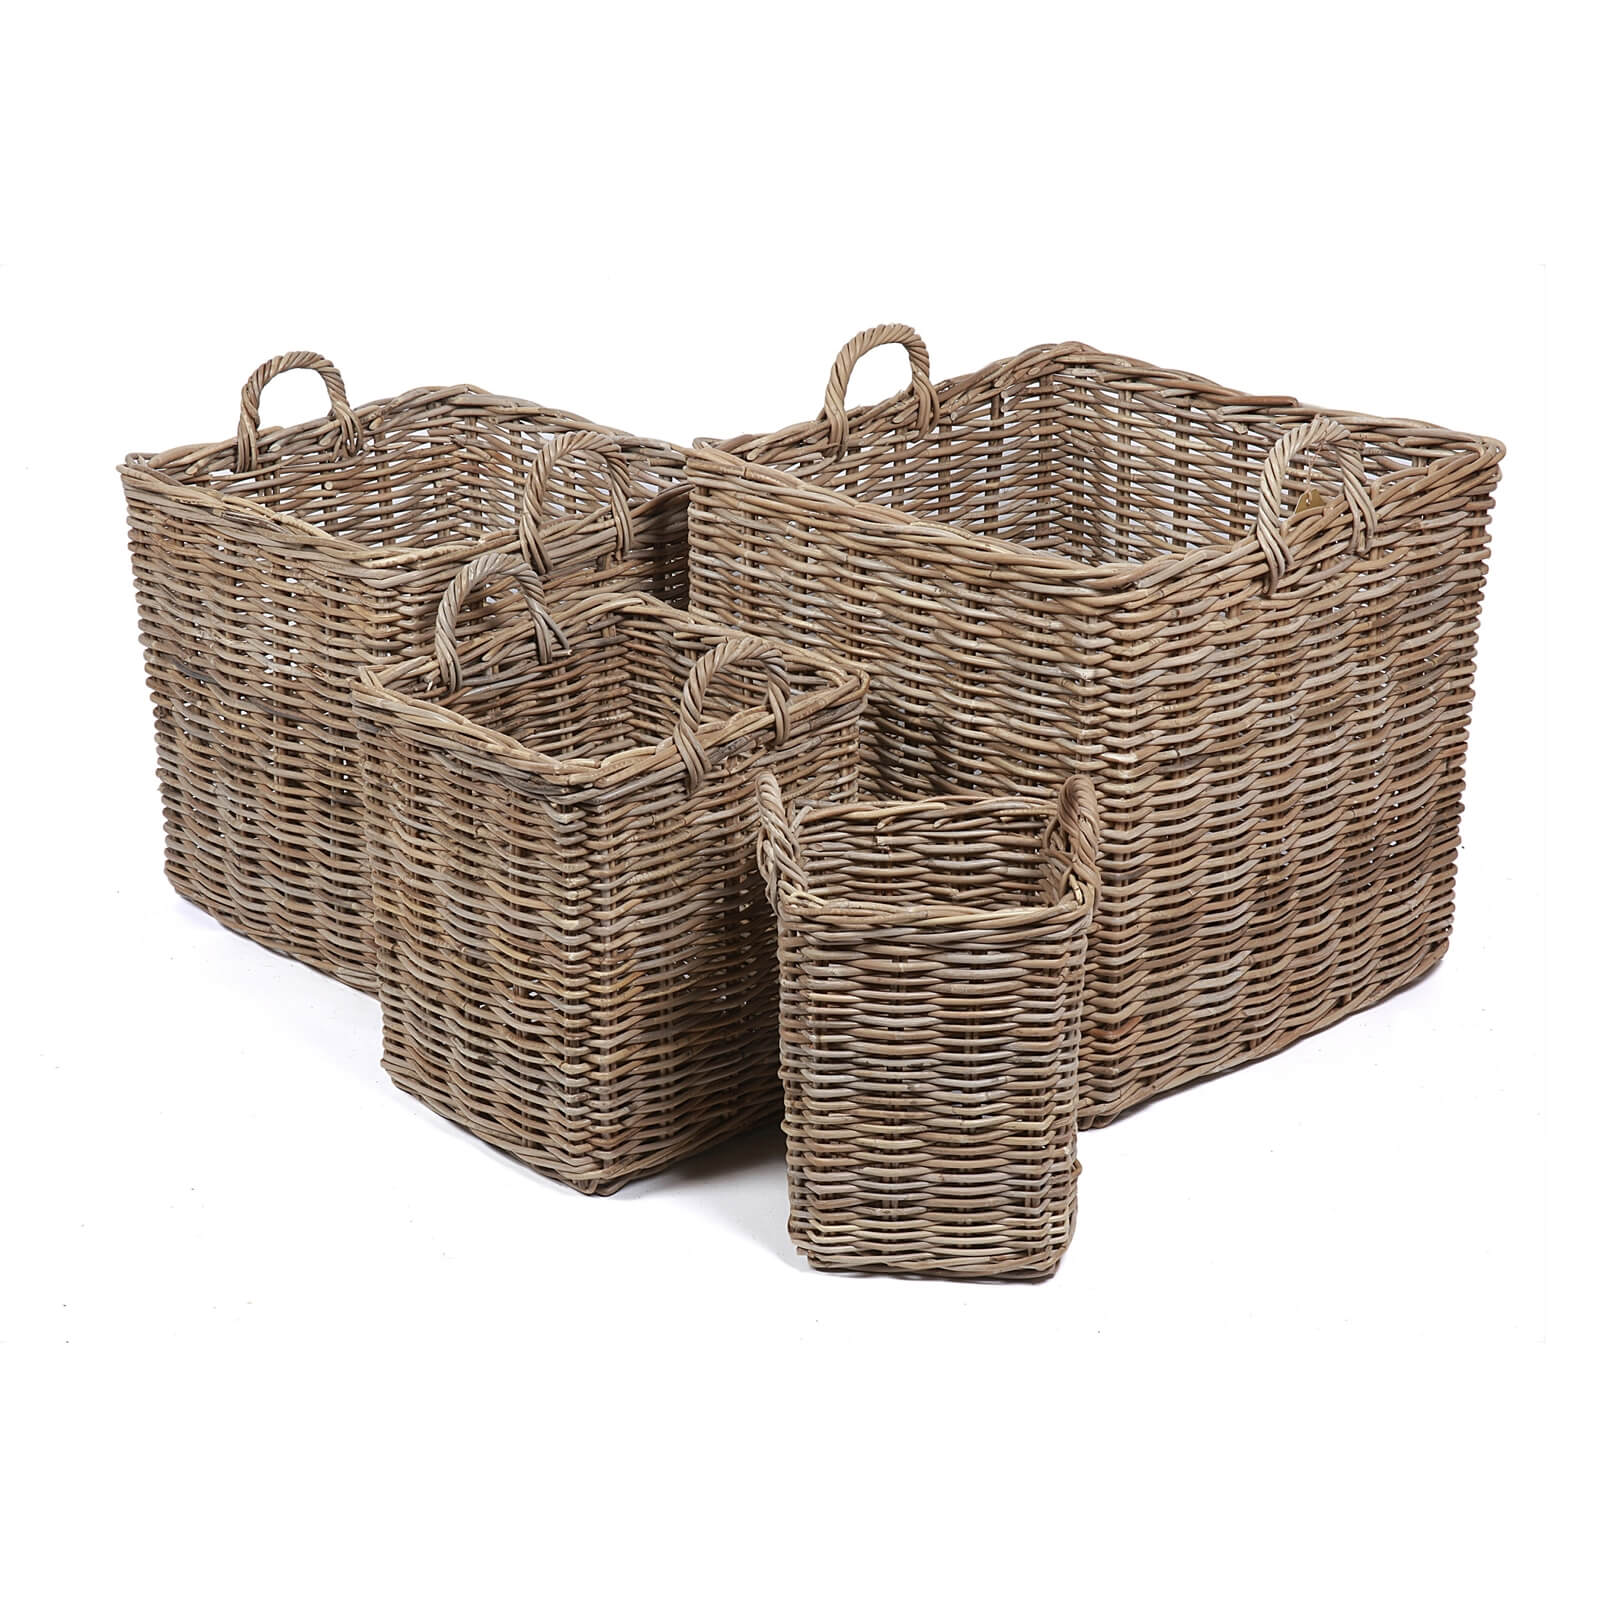 Set of 4 Square Wicker Baskets